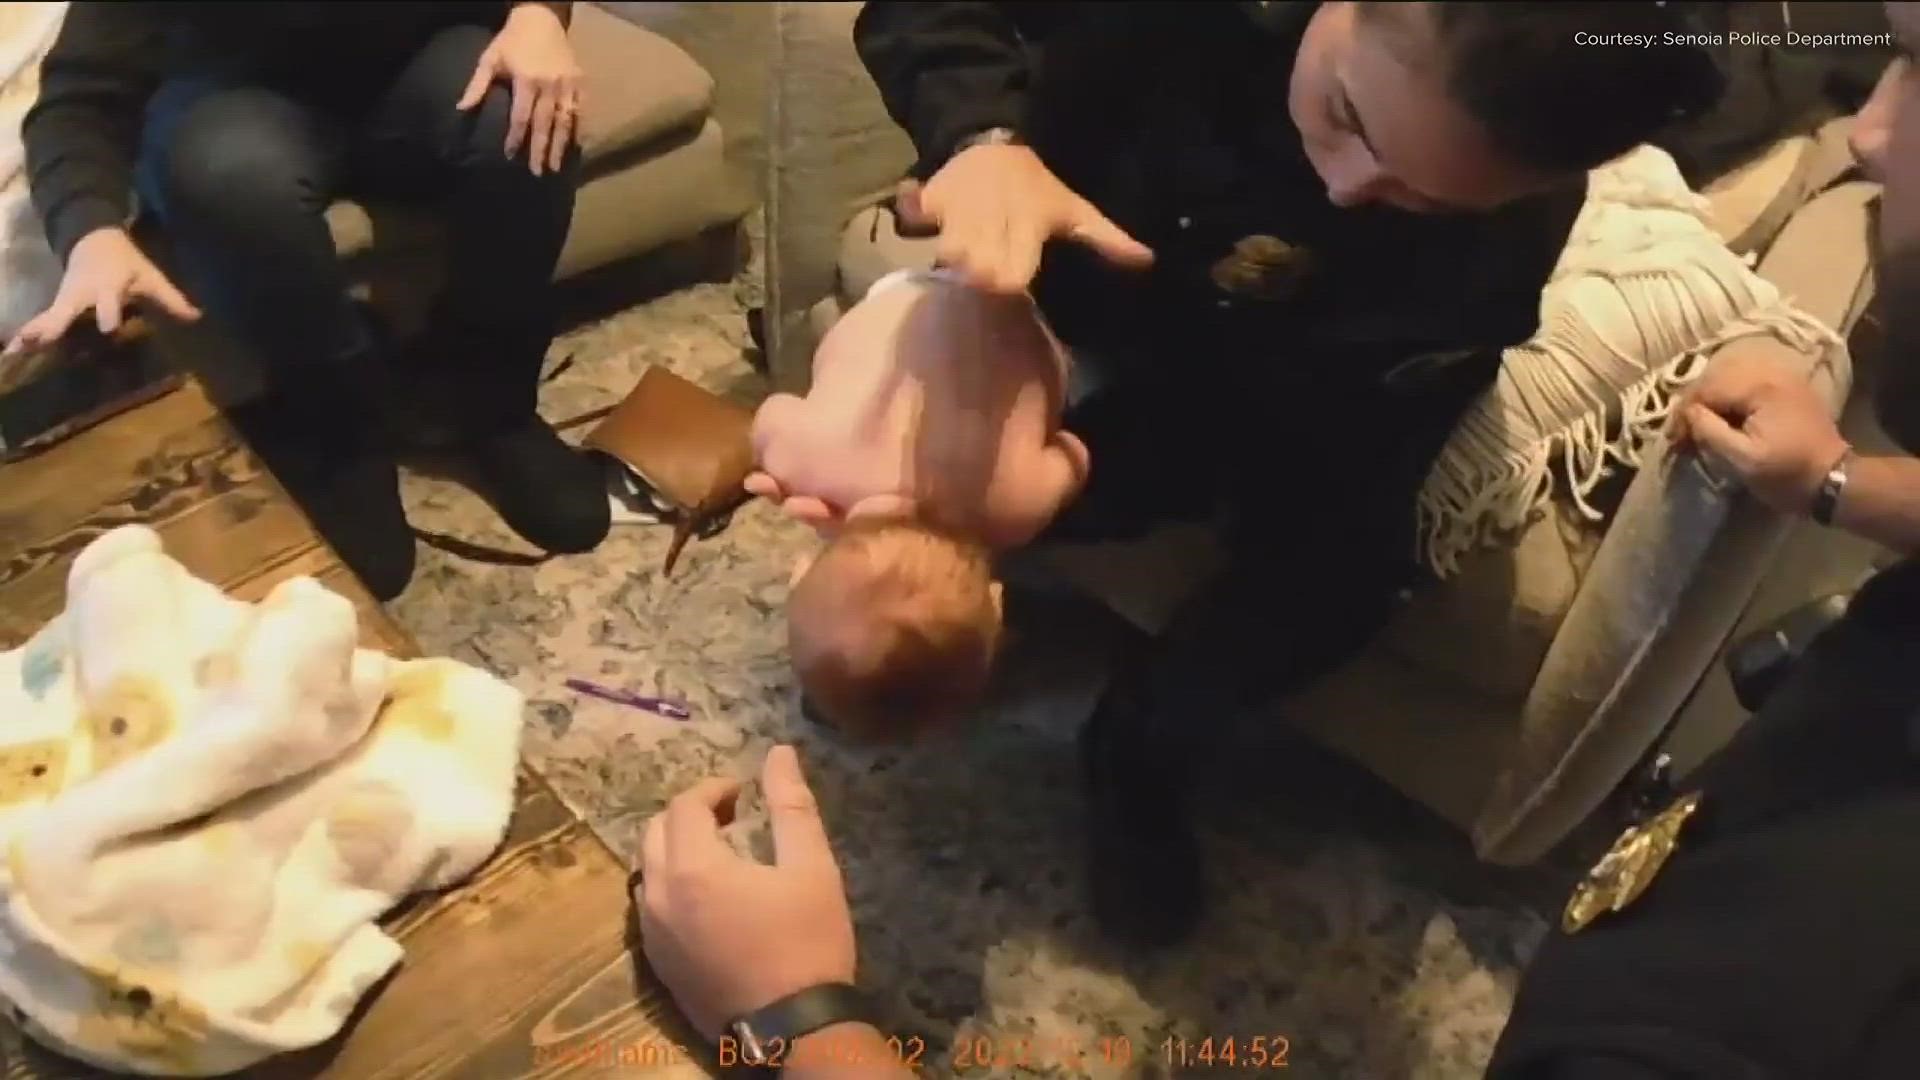 The 3-month-old Coweta County baby survived, thanks to the officer's help.